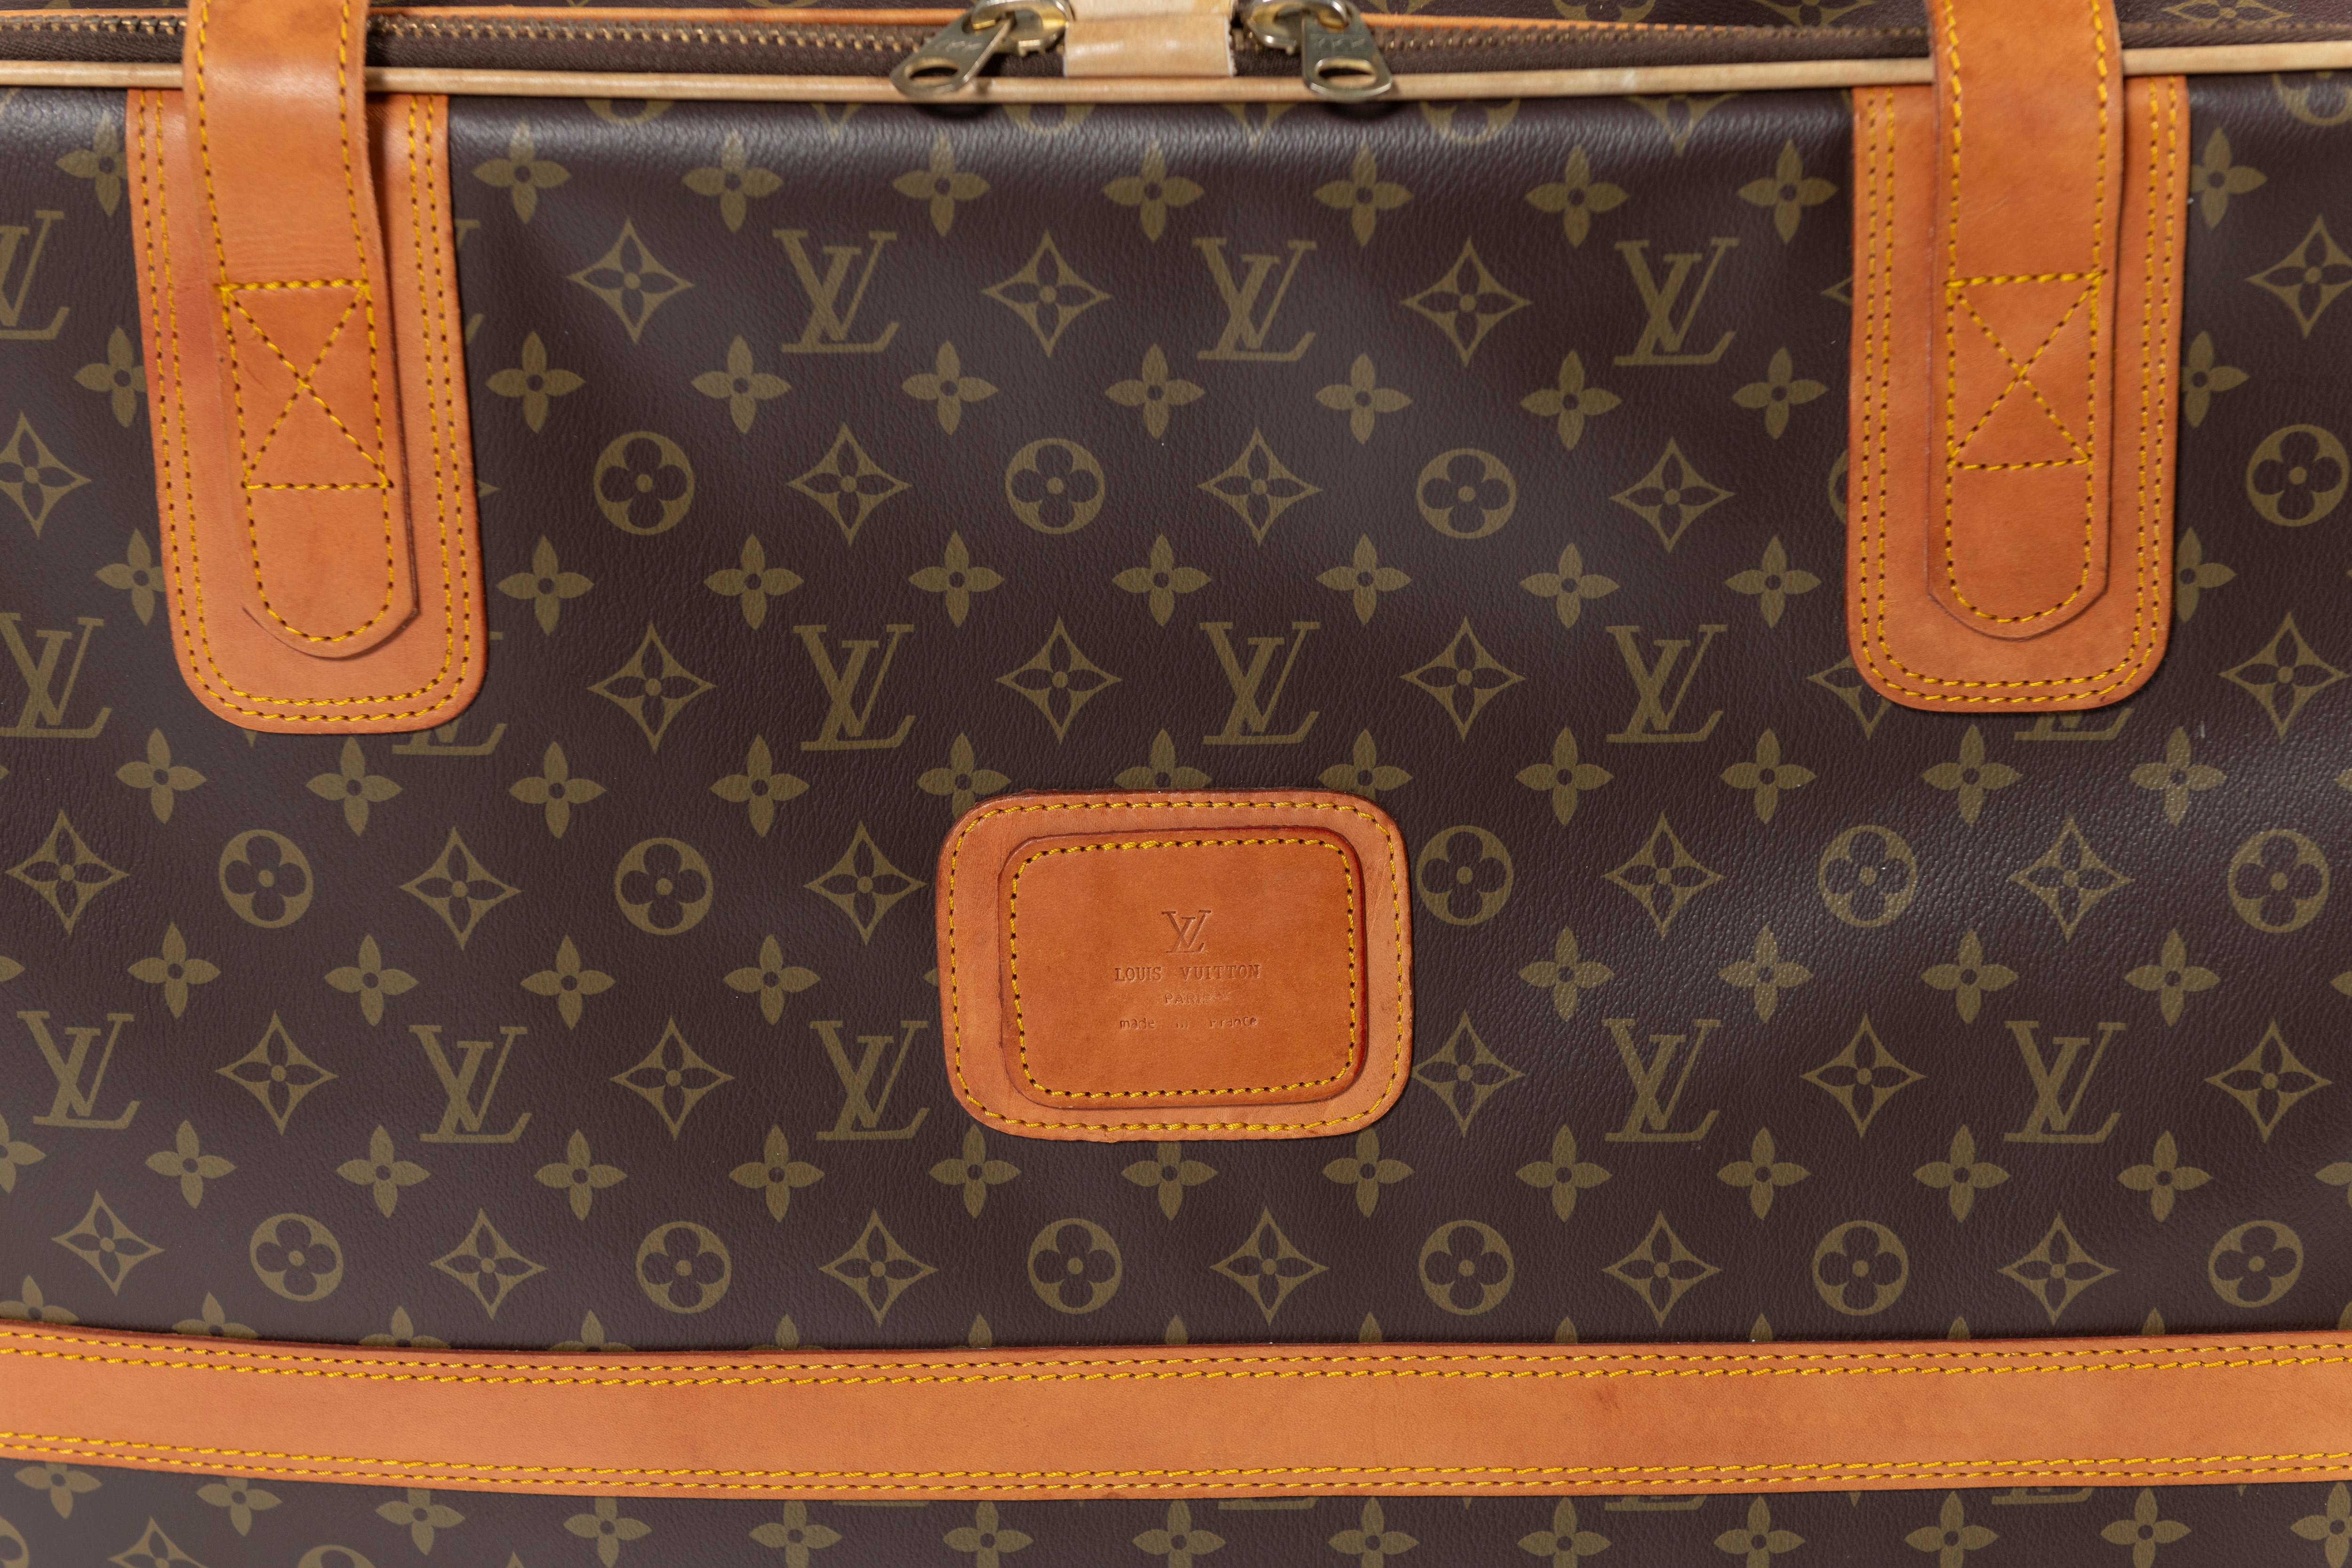 French Vintage Louis Vuitton Suitcase, Monogrammed Coated Canvas, Medium-Sized For Sale